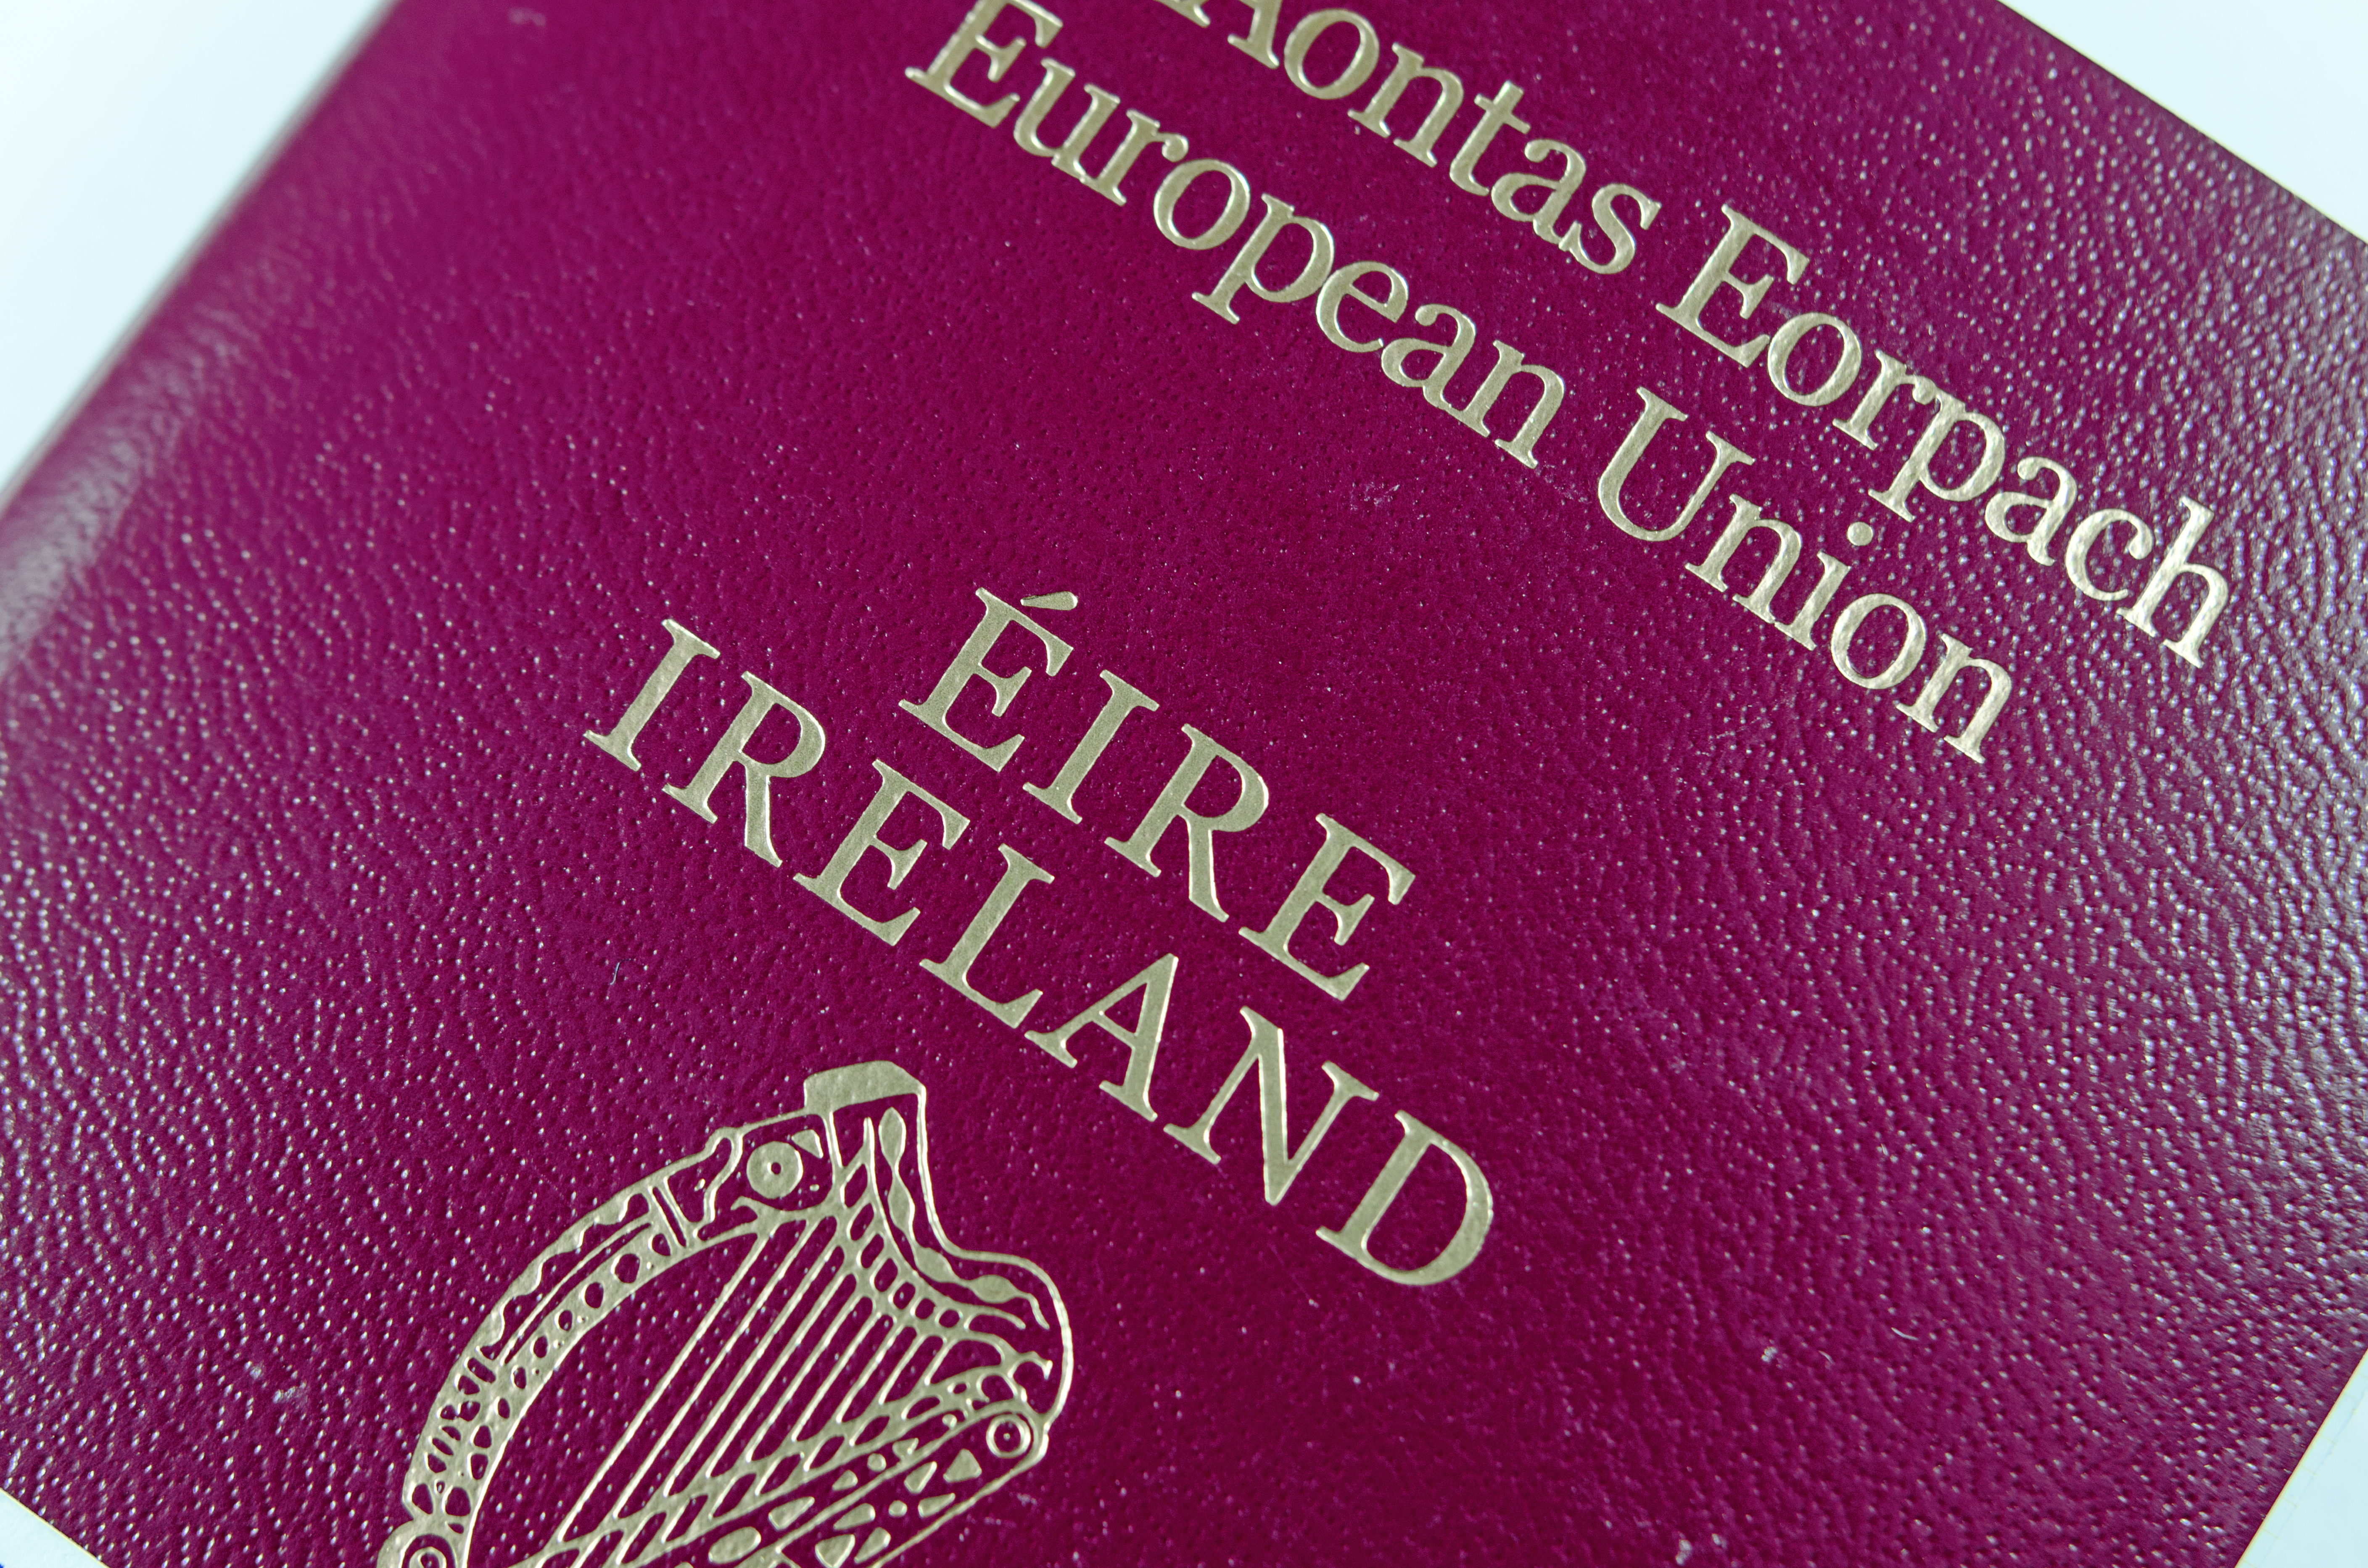 Gay Irish couple have finally received a passport for their son after long battle